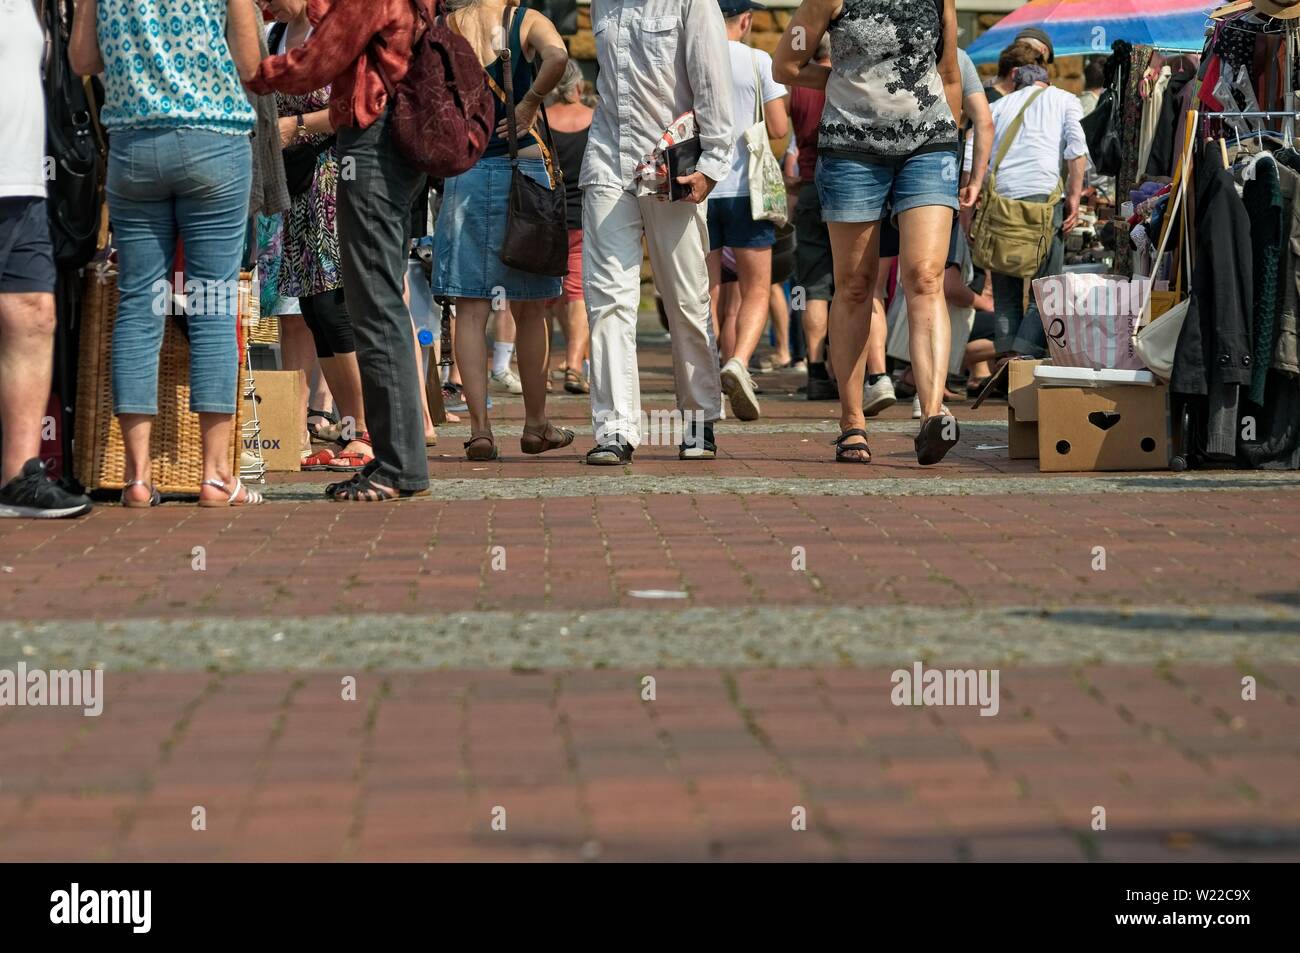 people at a weekend flea market on the streets with blurred background Stock Photo